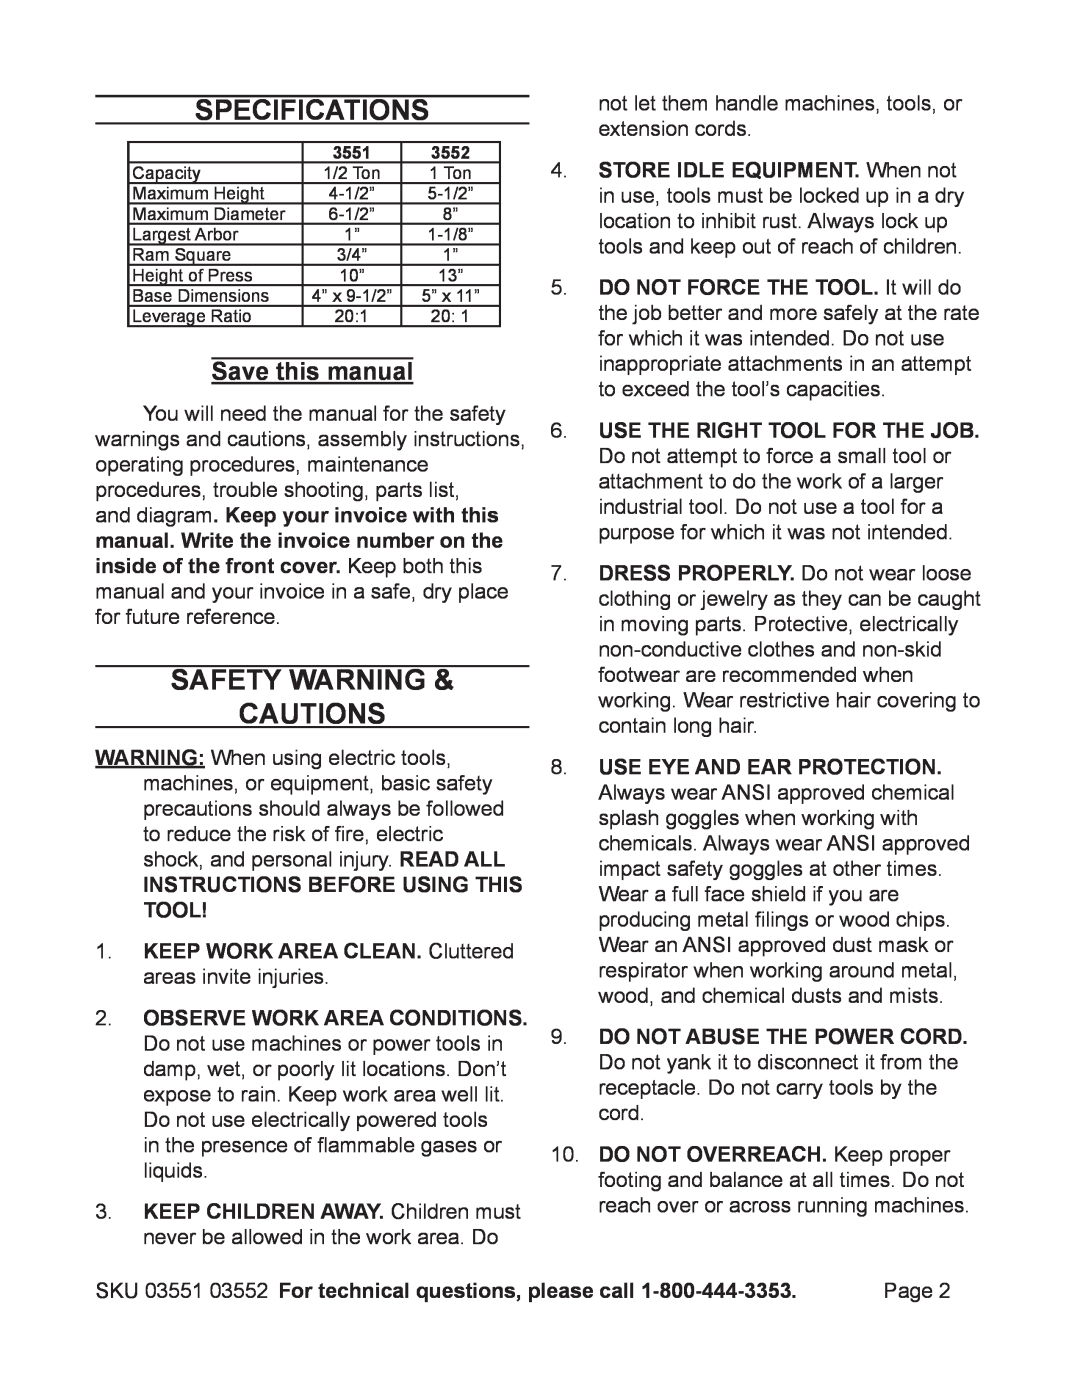 Harbor Freight Tools 3552, 3551 operating instructions Specifications, Safety warning cautions, Save this manual 